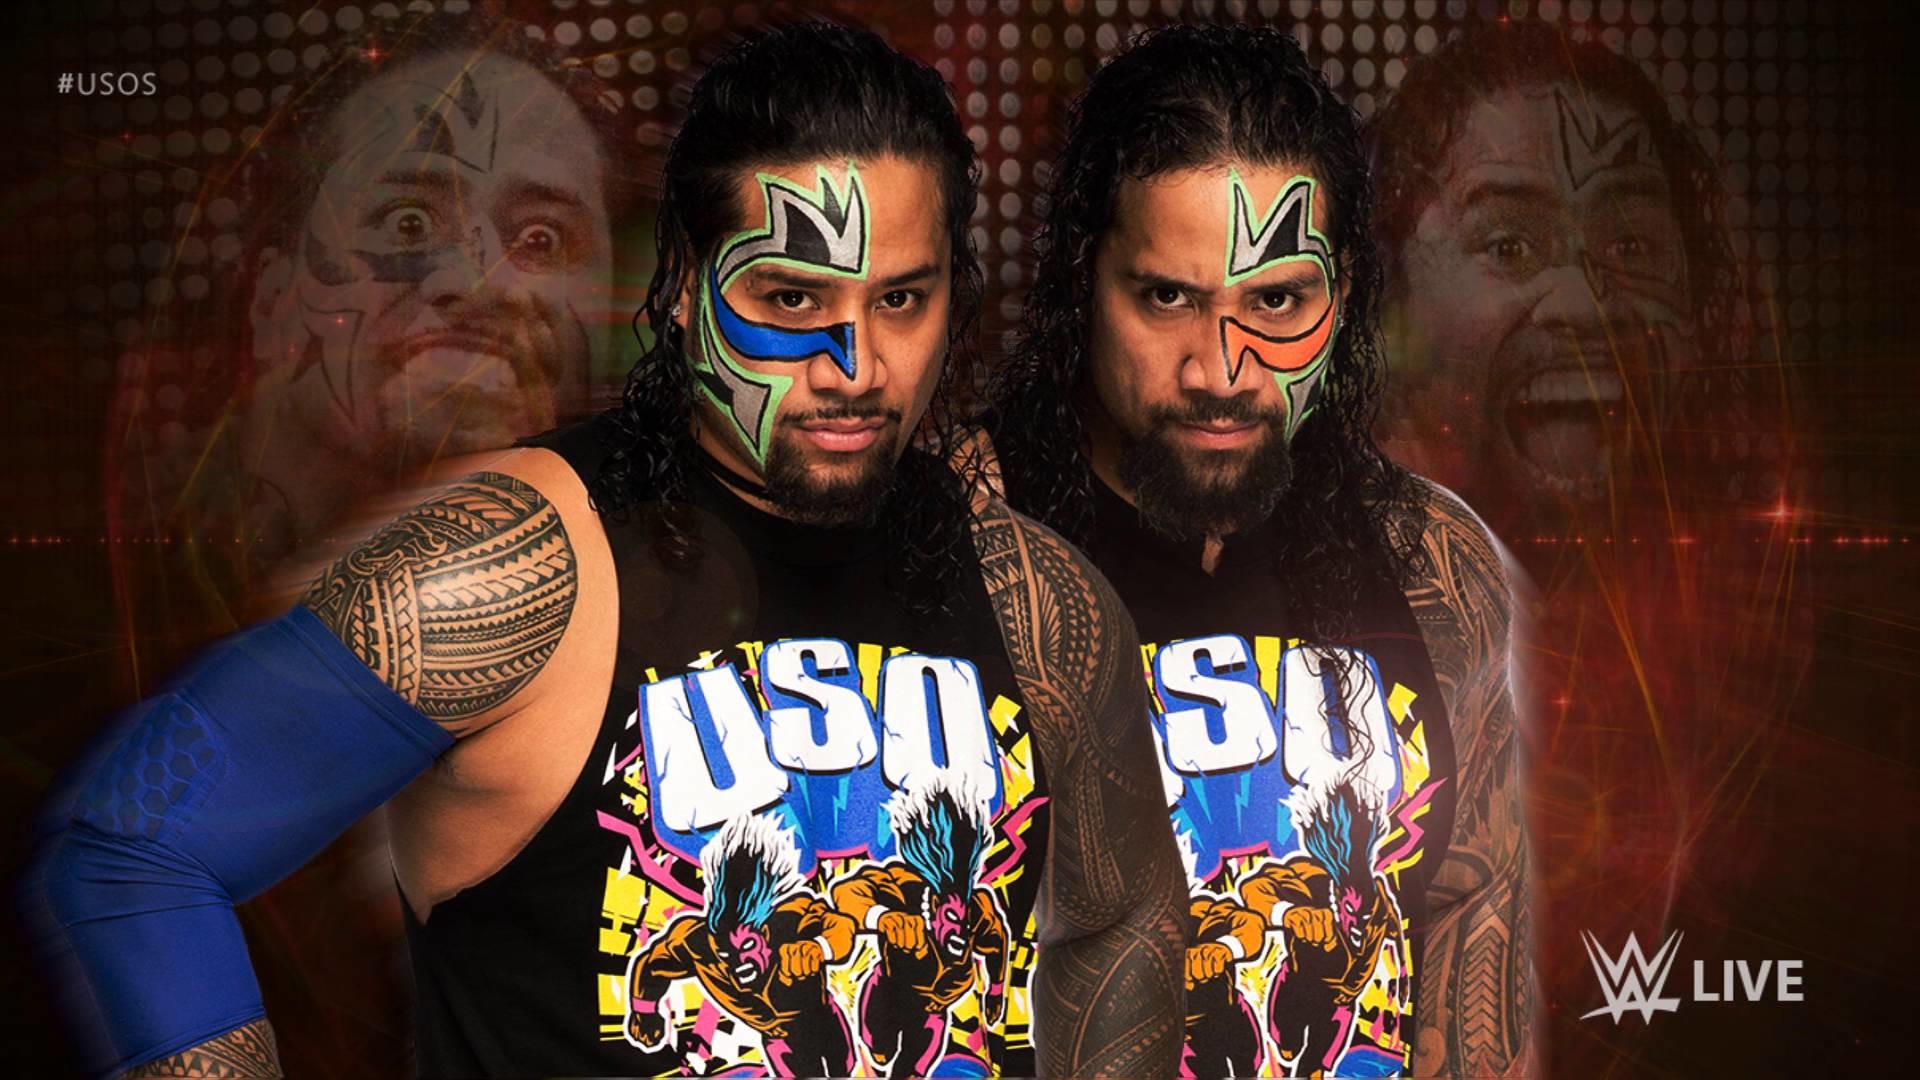 1920x1080 2011-2016 : The Usos 4th WWE Theme Song ''So Close Now" by David Dallas  with Download Link - YouTube